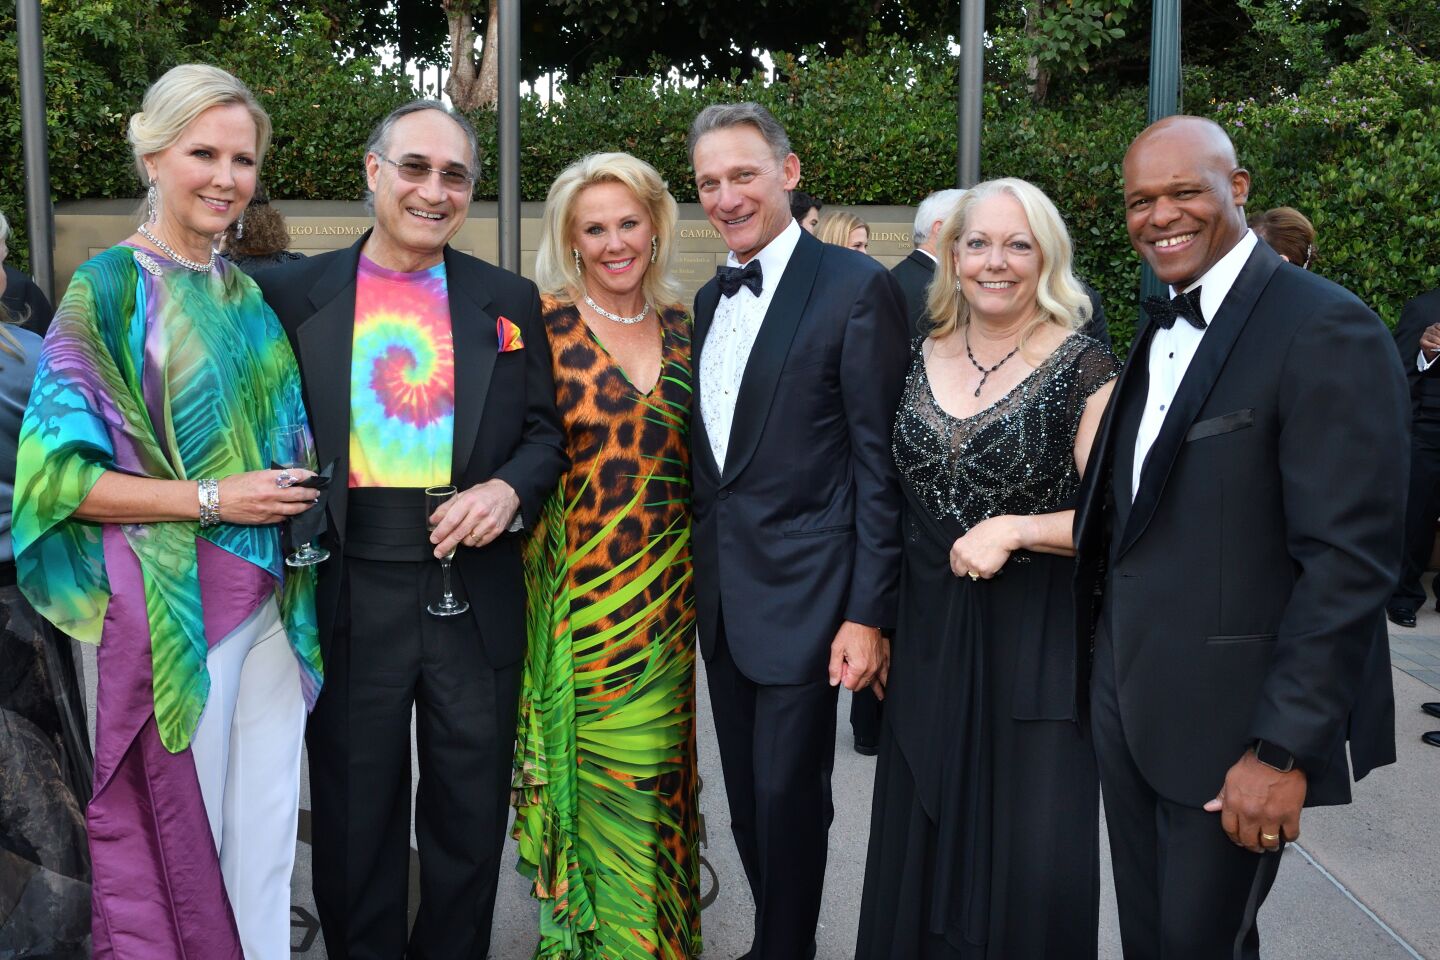 Micki Olin and Dr. Reid Abrams, Muffy Walker and Dr. John Reed, Jackie and Del Lewis